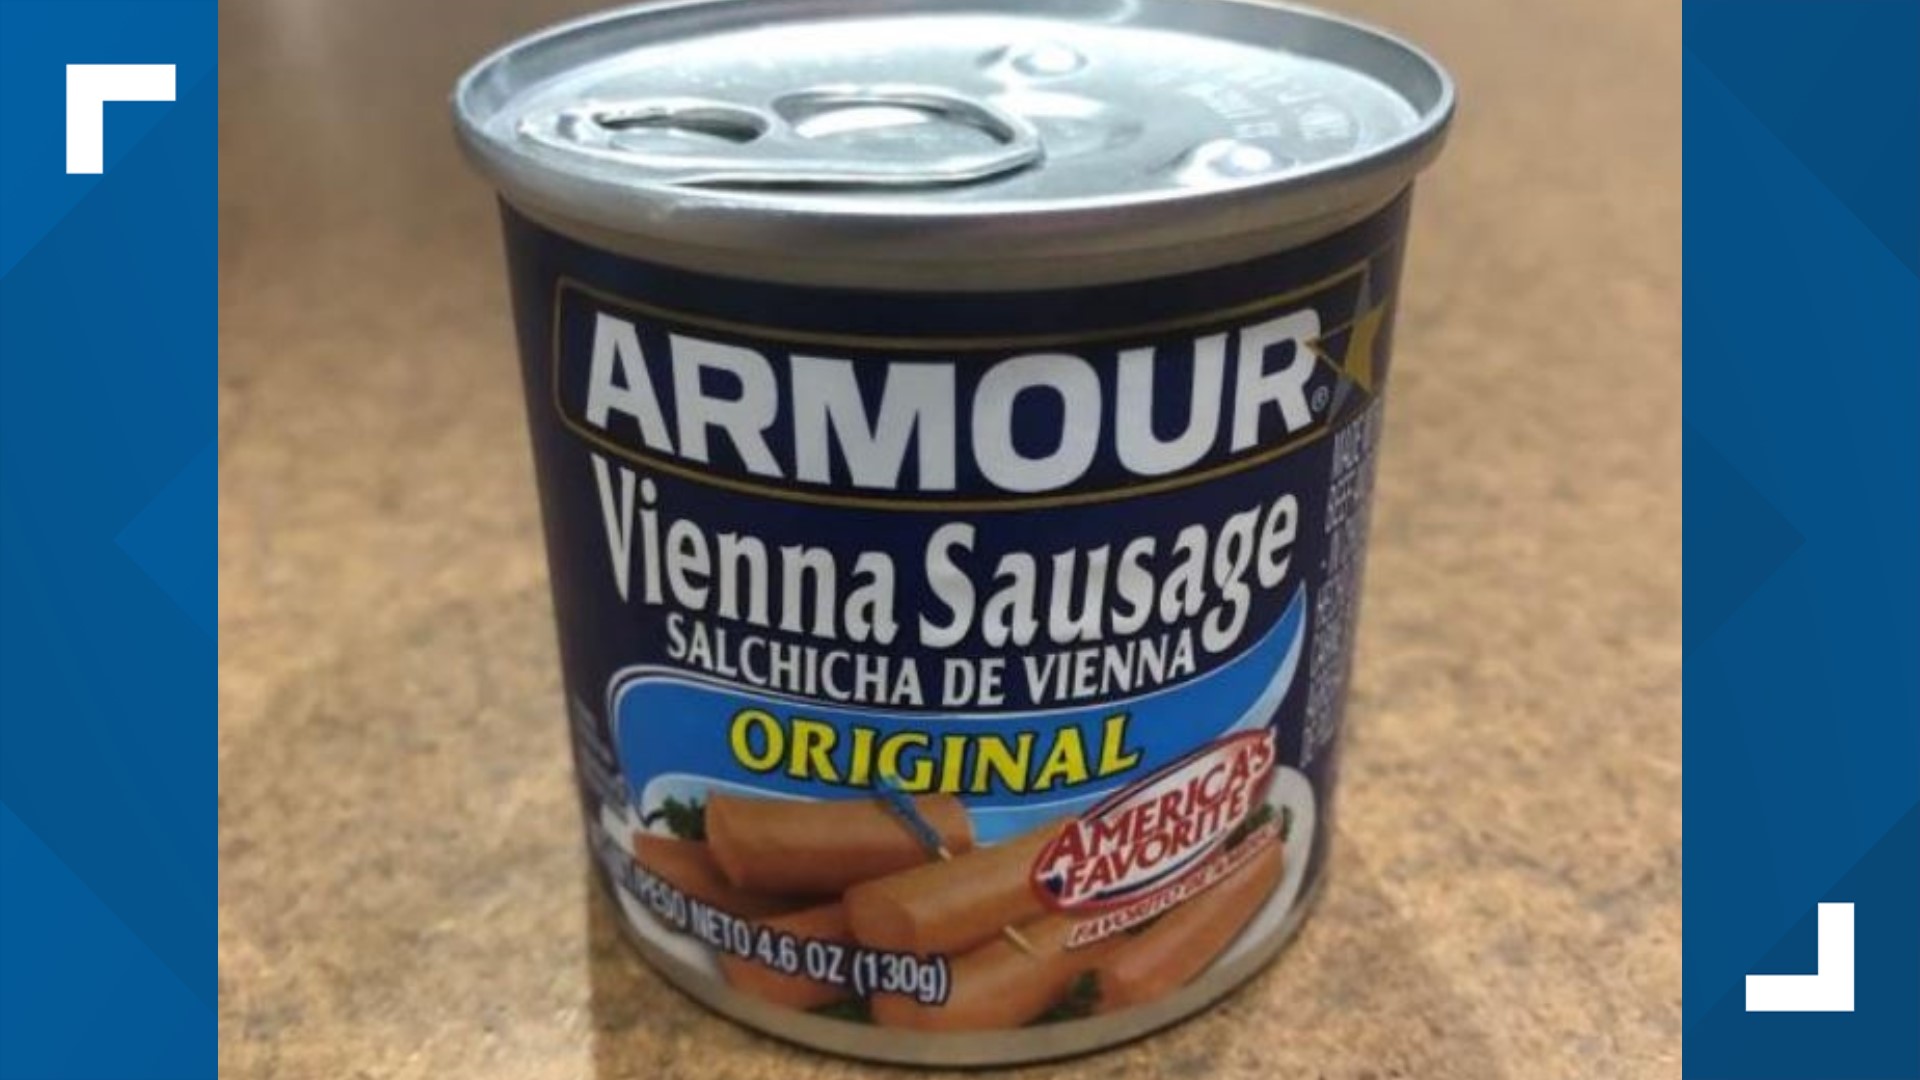 The recall mainly impacts canned Vienna Sausage sold nationwide under several different brand names including Armour, GOYA, Kroger and Walmart's Great Value.